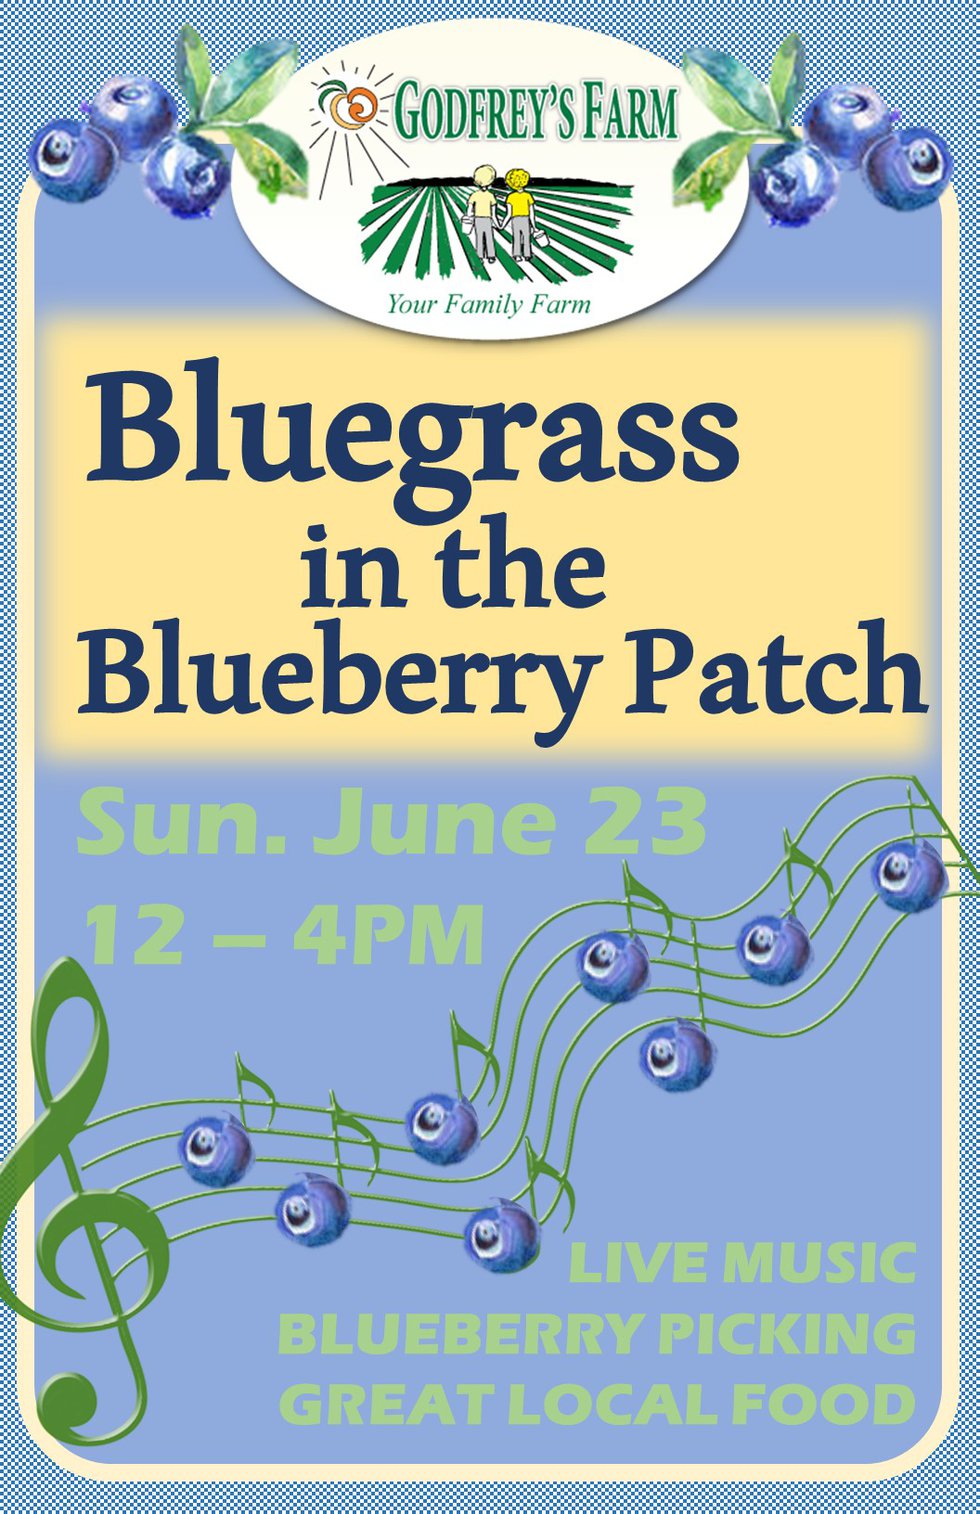 2019 Bluegrass in the Blueberry Patch poster.jpg